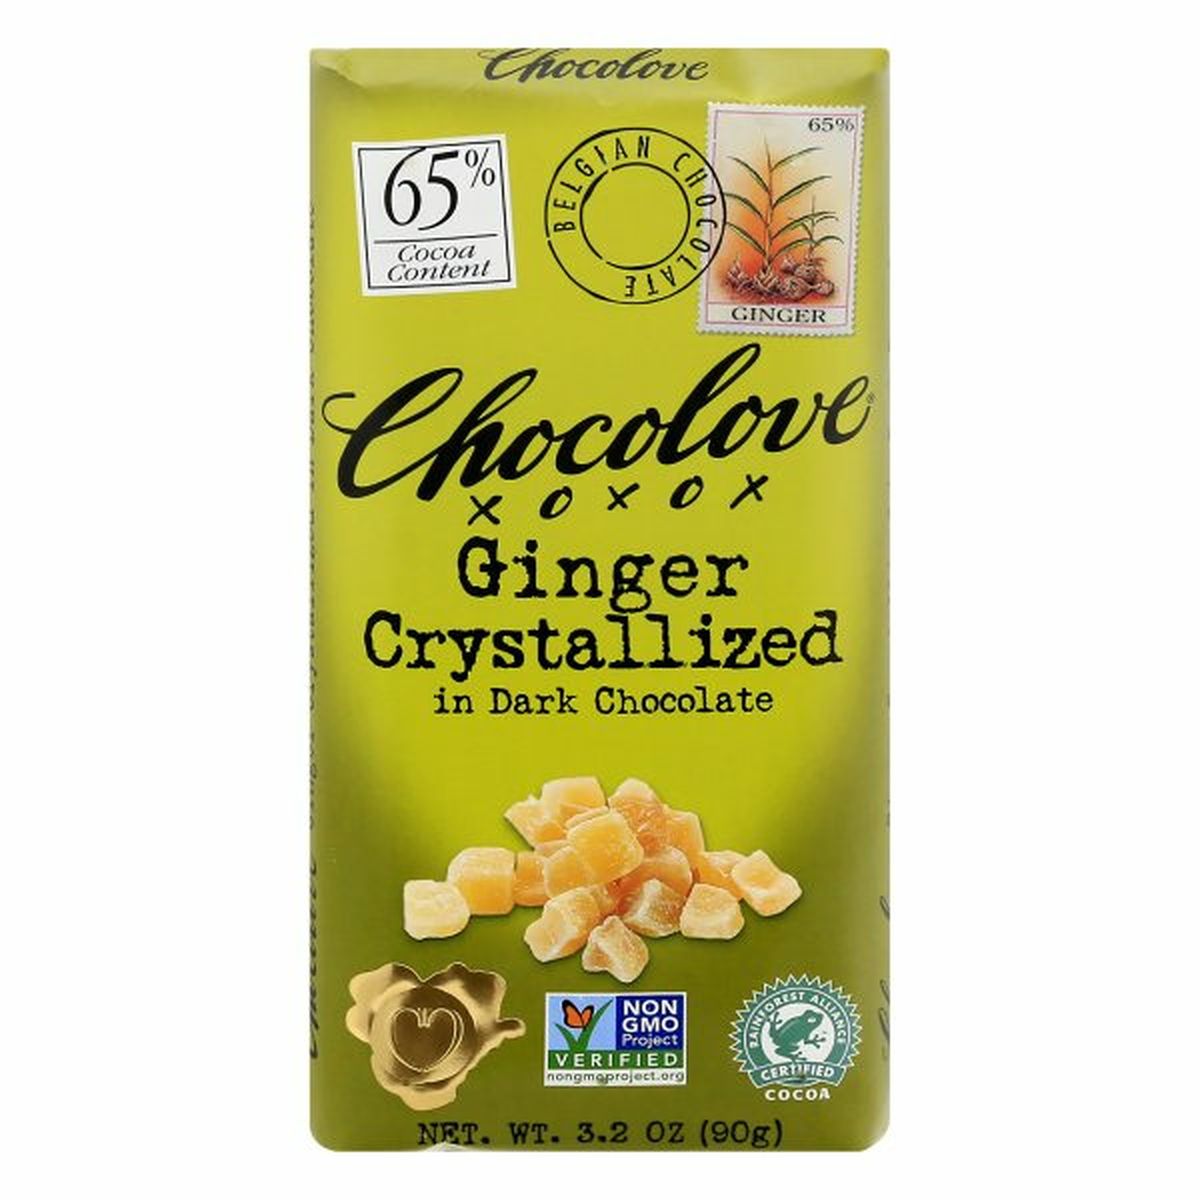 Calories in Chocolove Dark Chocolate, Ginger Crystallized, 65 Cocoa